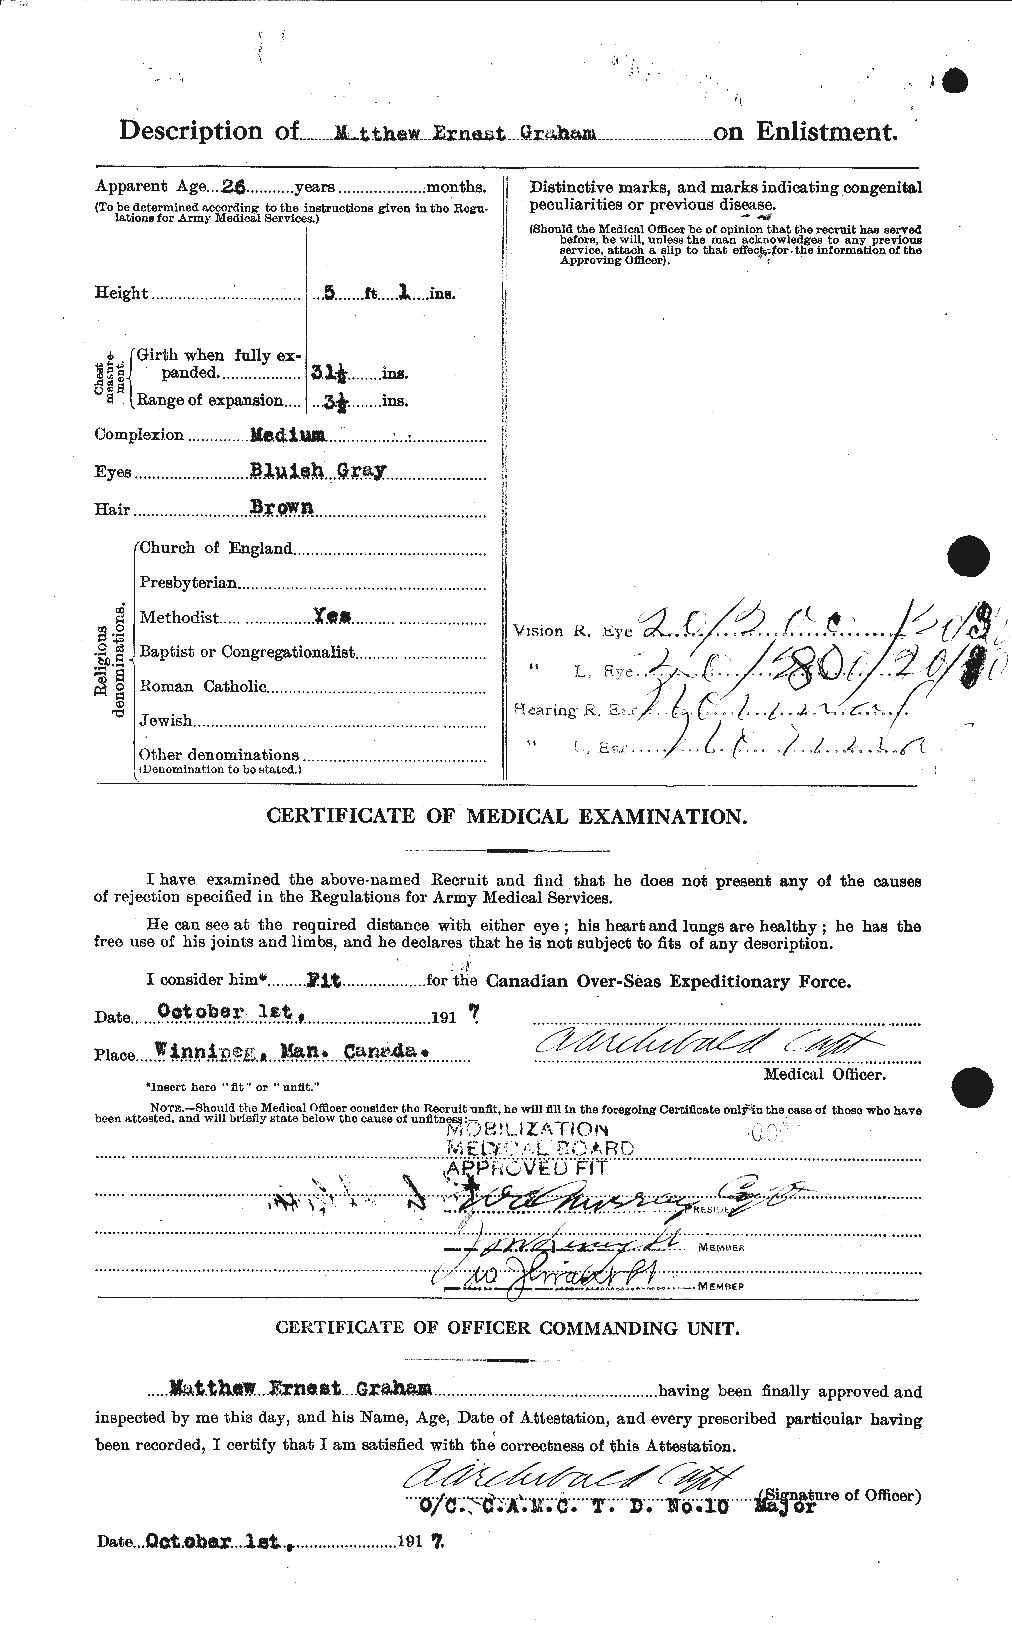 Personnel Records of the First World War - CEF 359297b